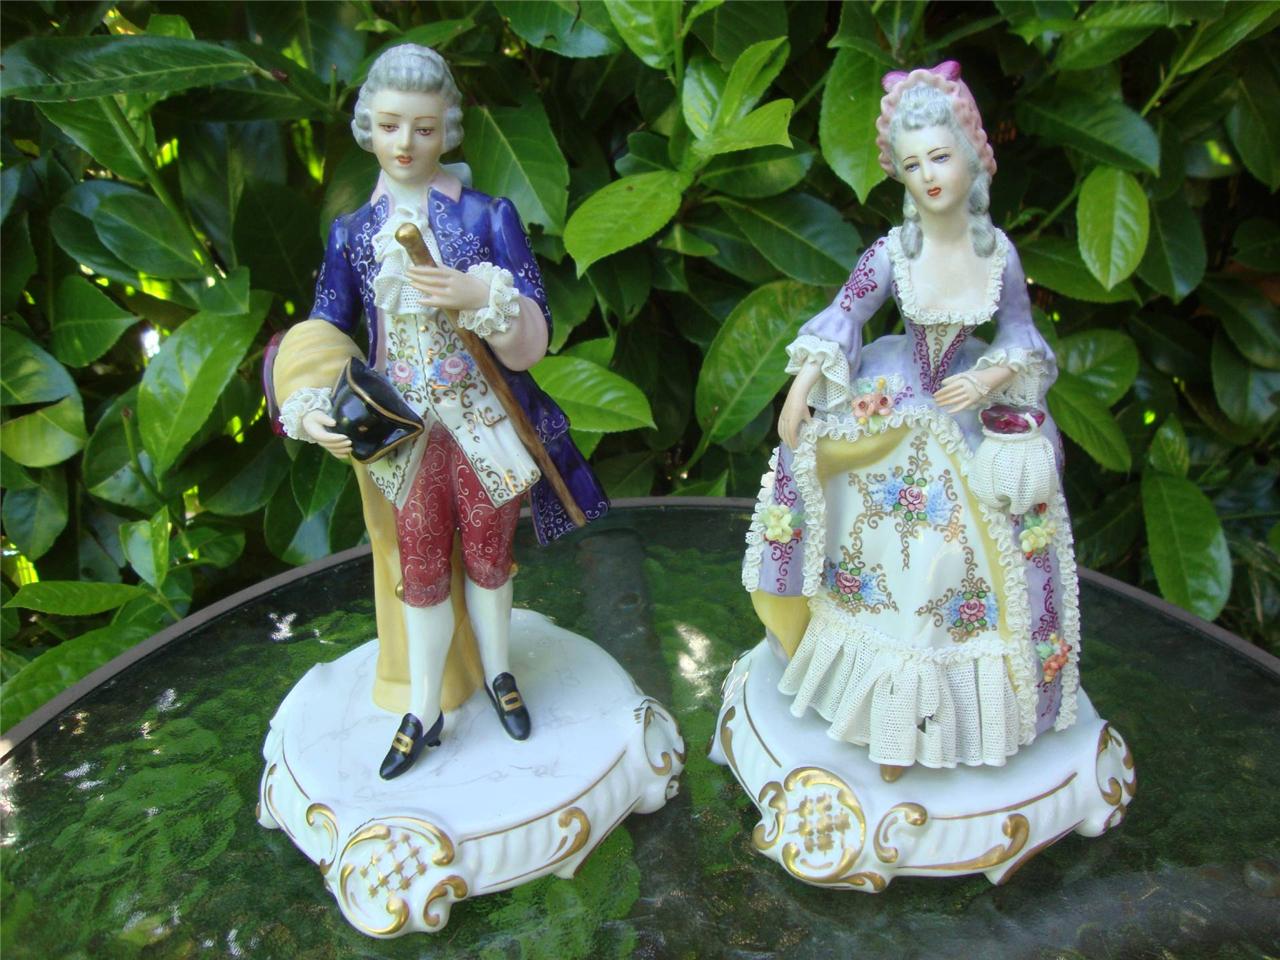 LOVELY PAIR PORCELAIN CAPODIMONTE FIGURES OF LADY AND GENT DRESDEN LACE - Picture 1 of 1